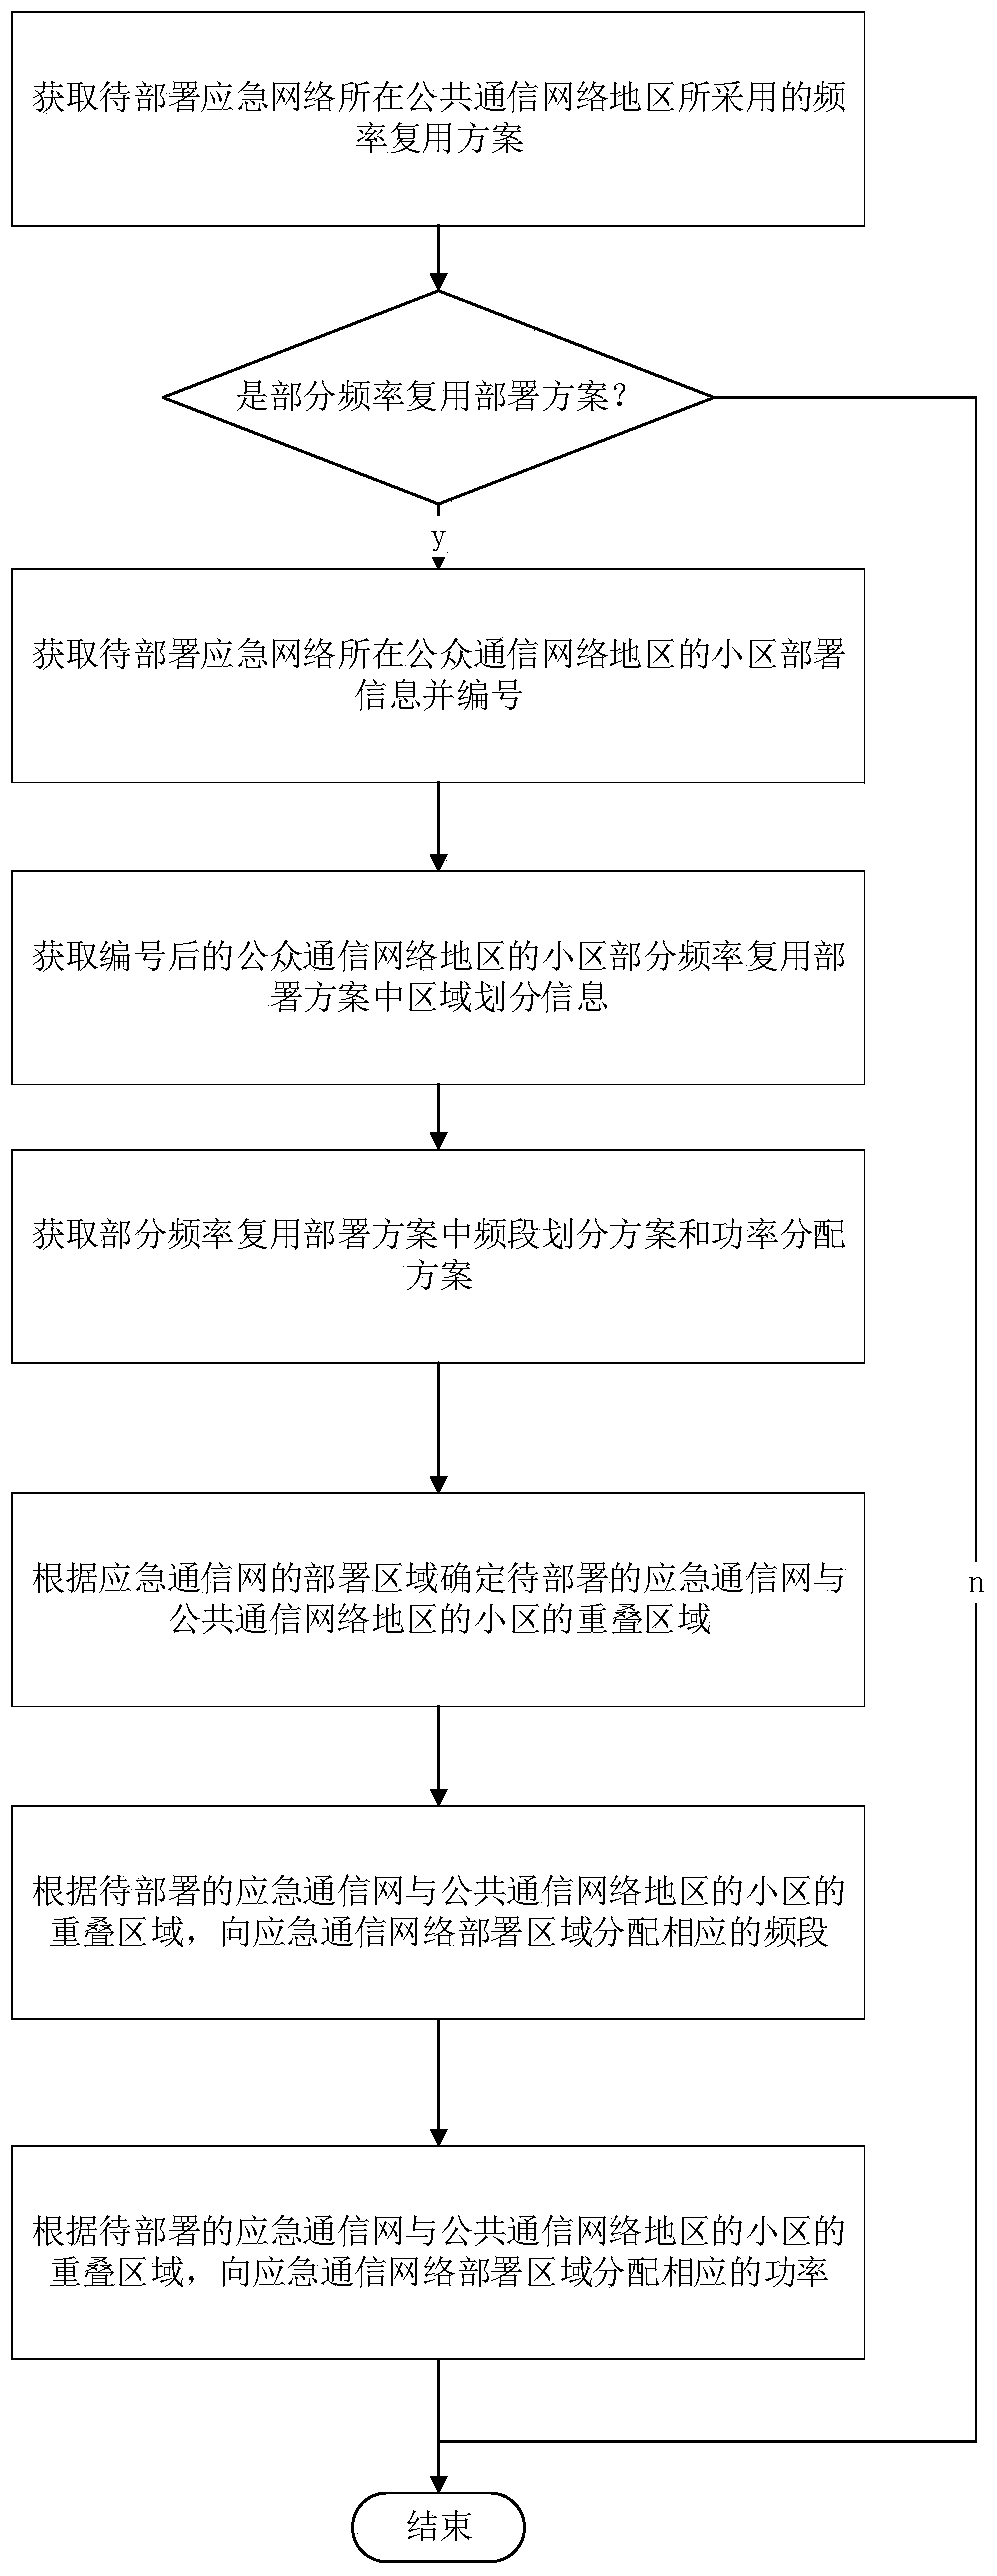 An emergency communication network deployment method and base station